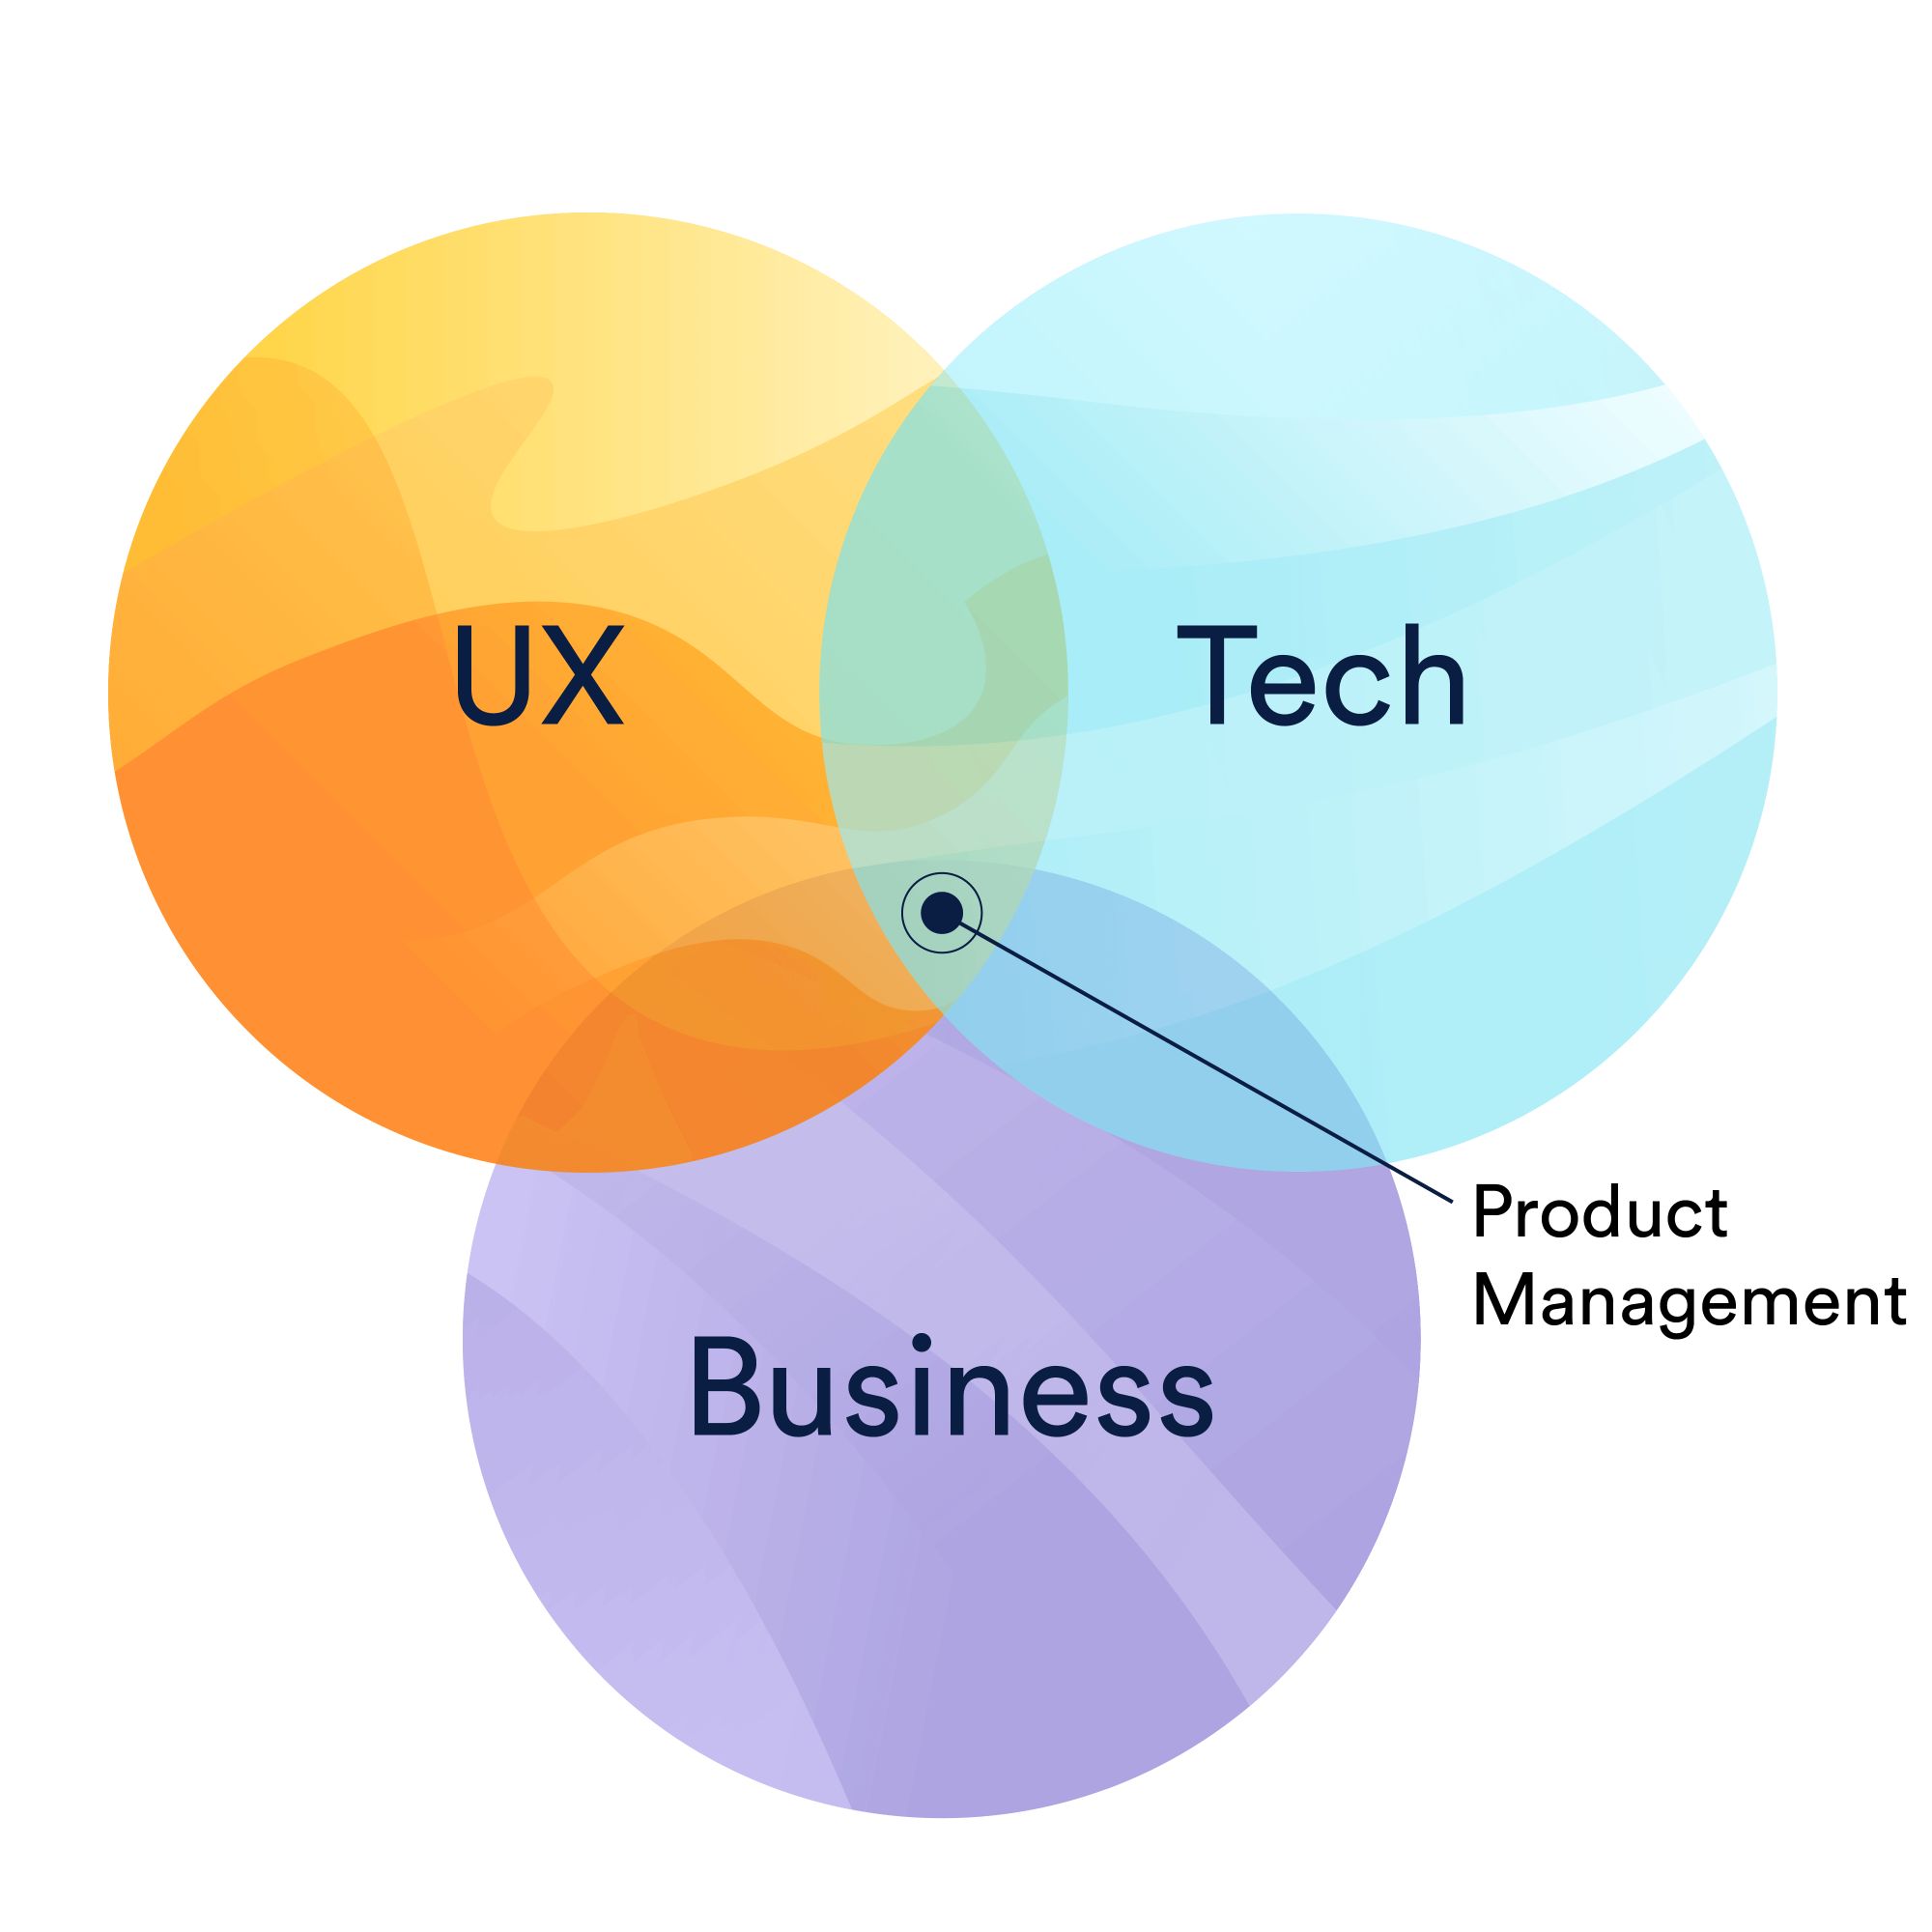 Product manager Job - UX, Tech and Business